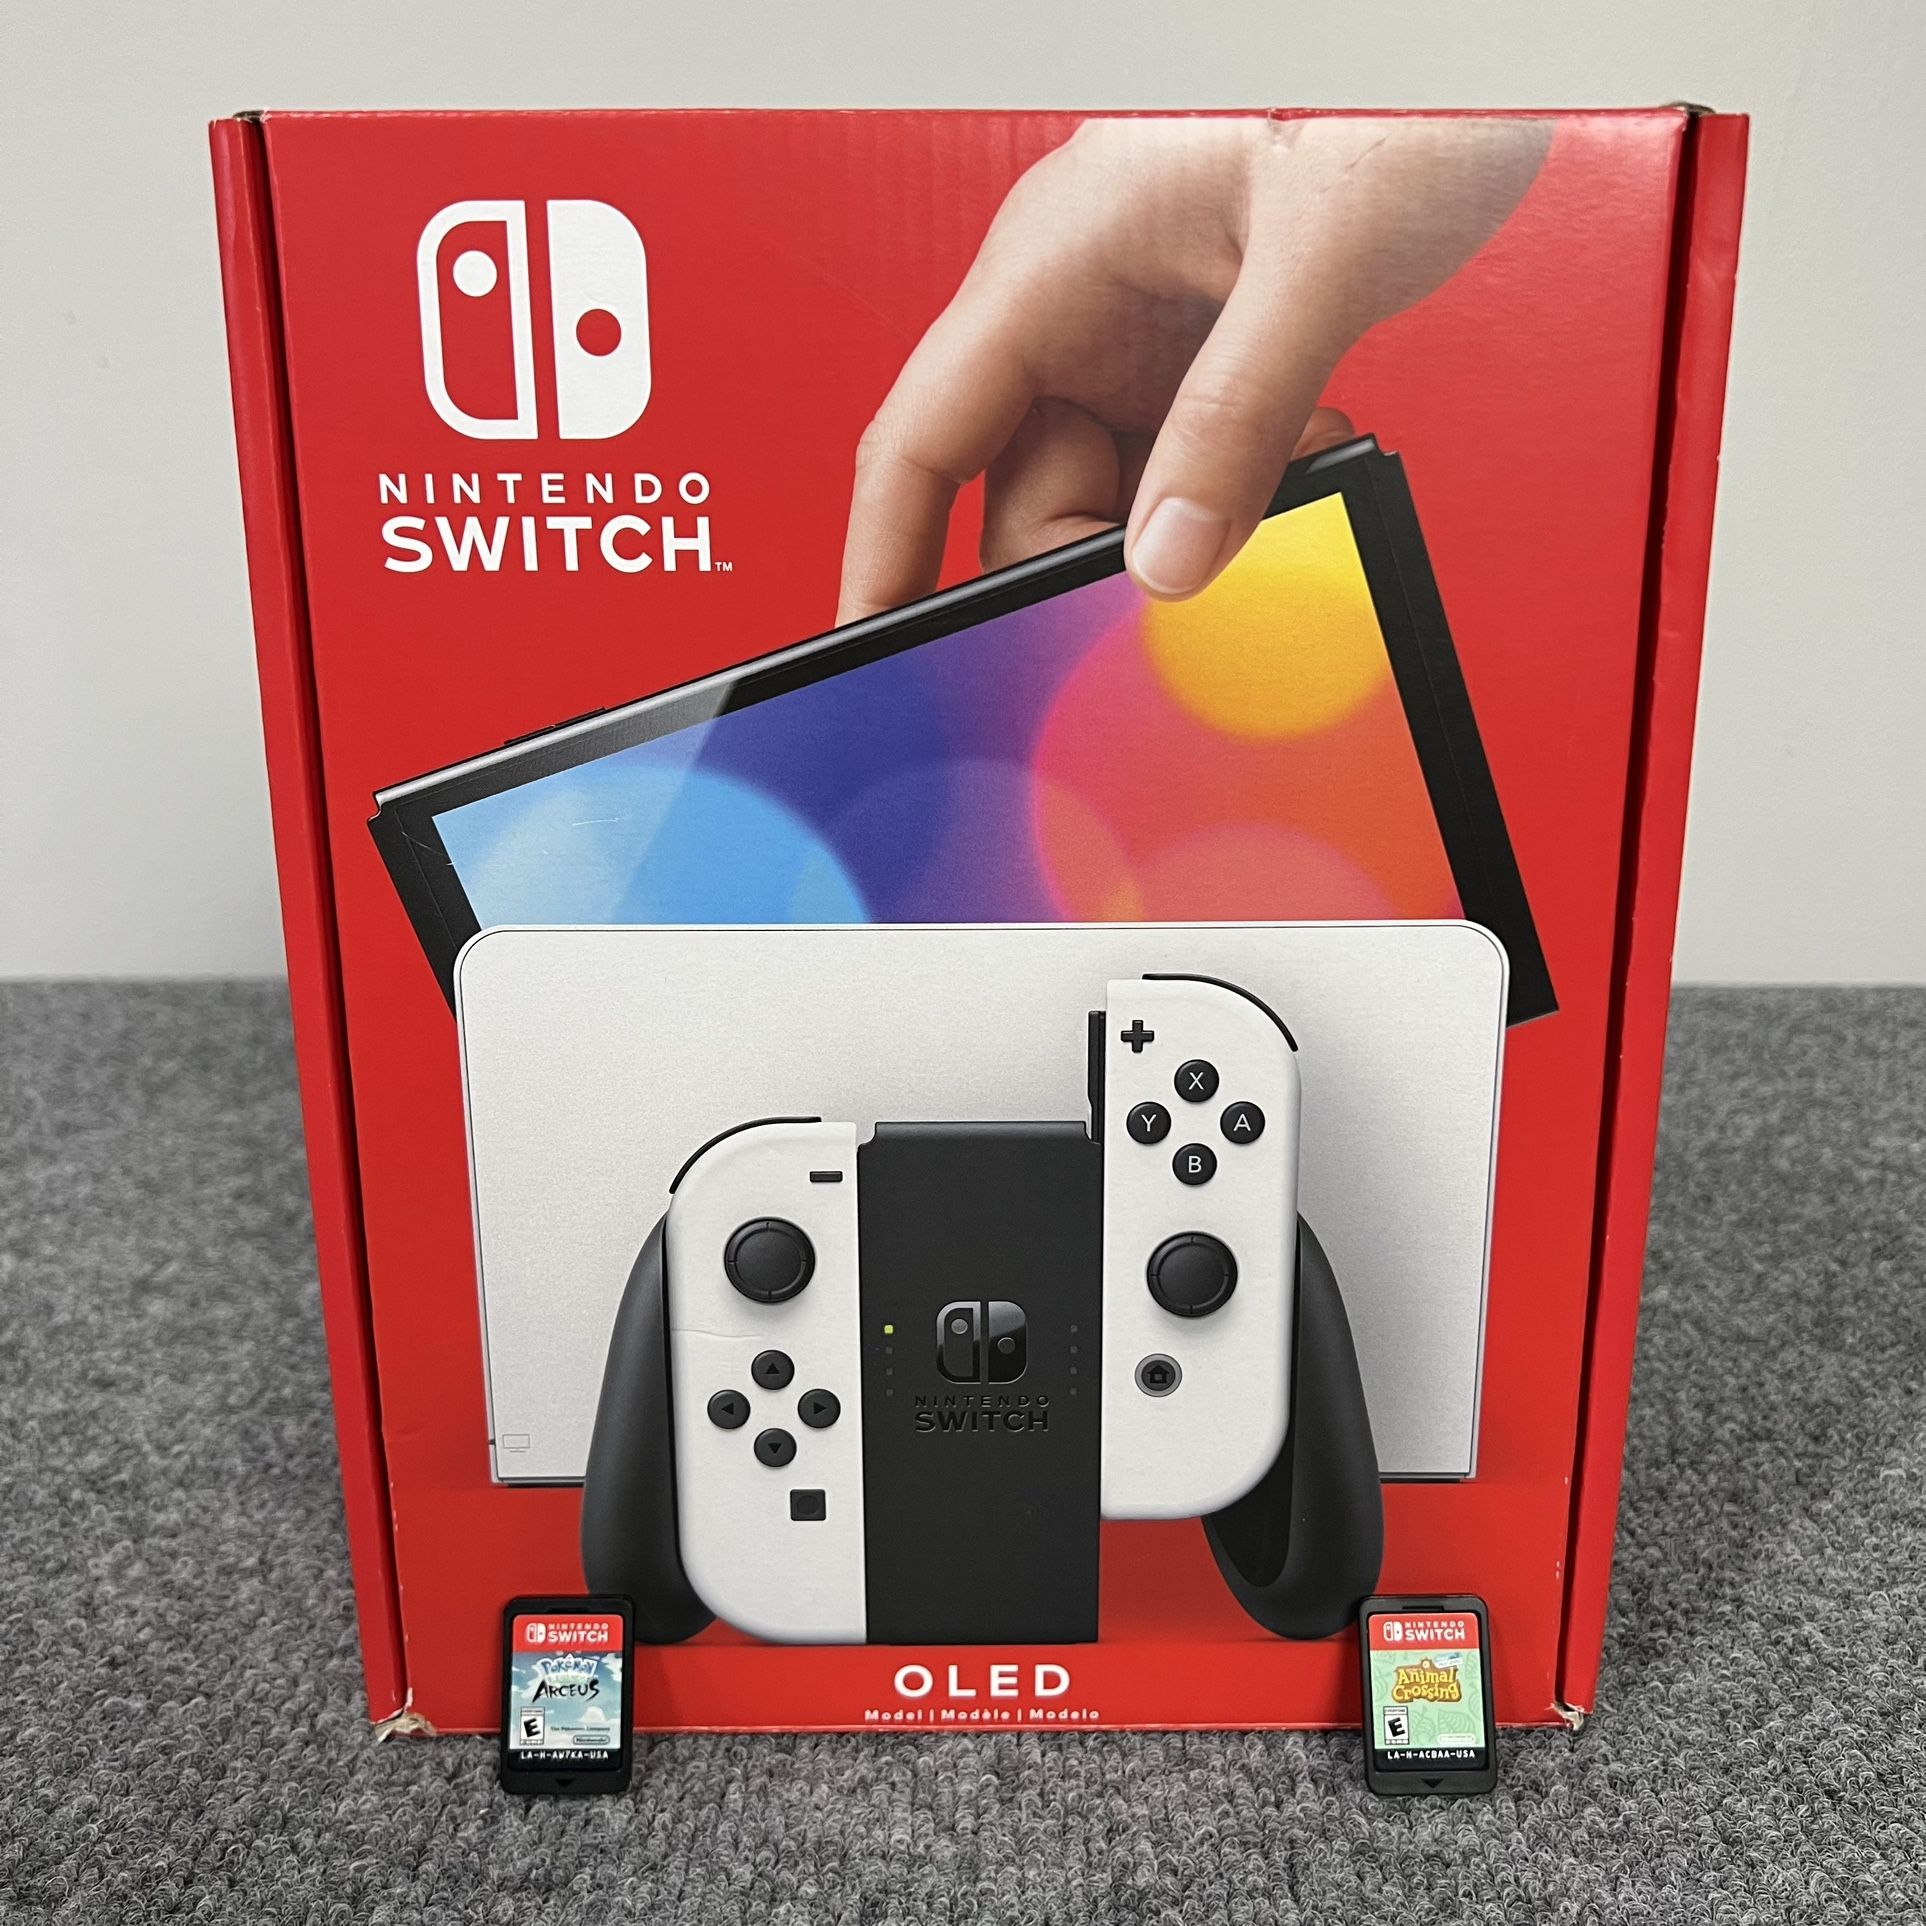 Trade For Video Games - Nintendo Switch OLED Model